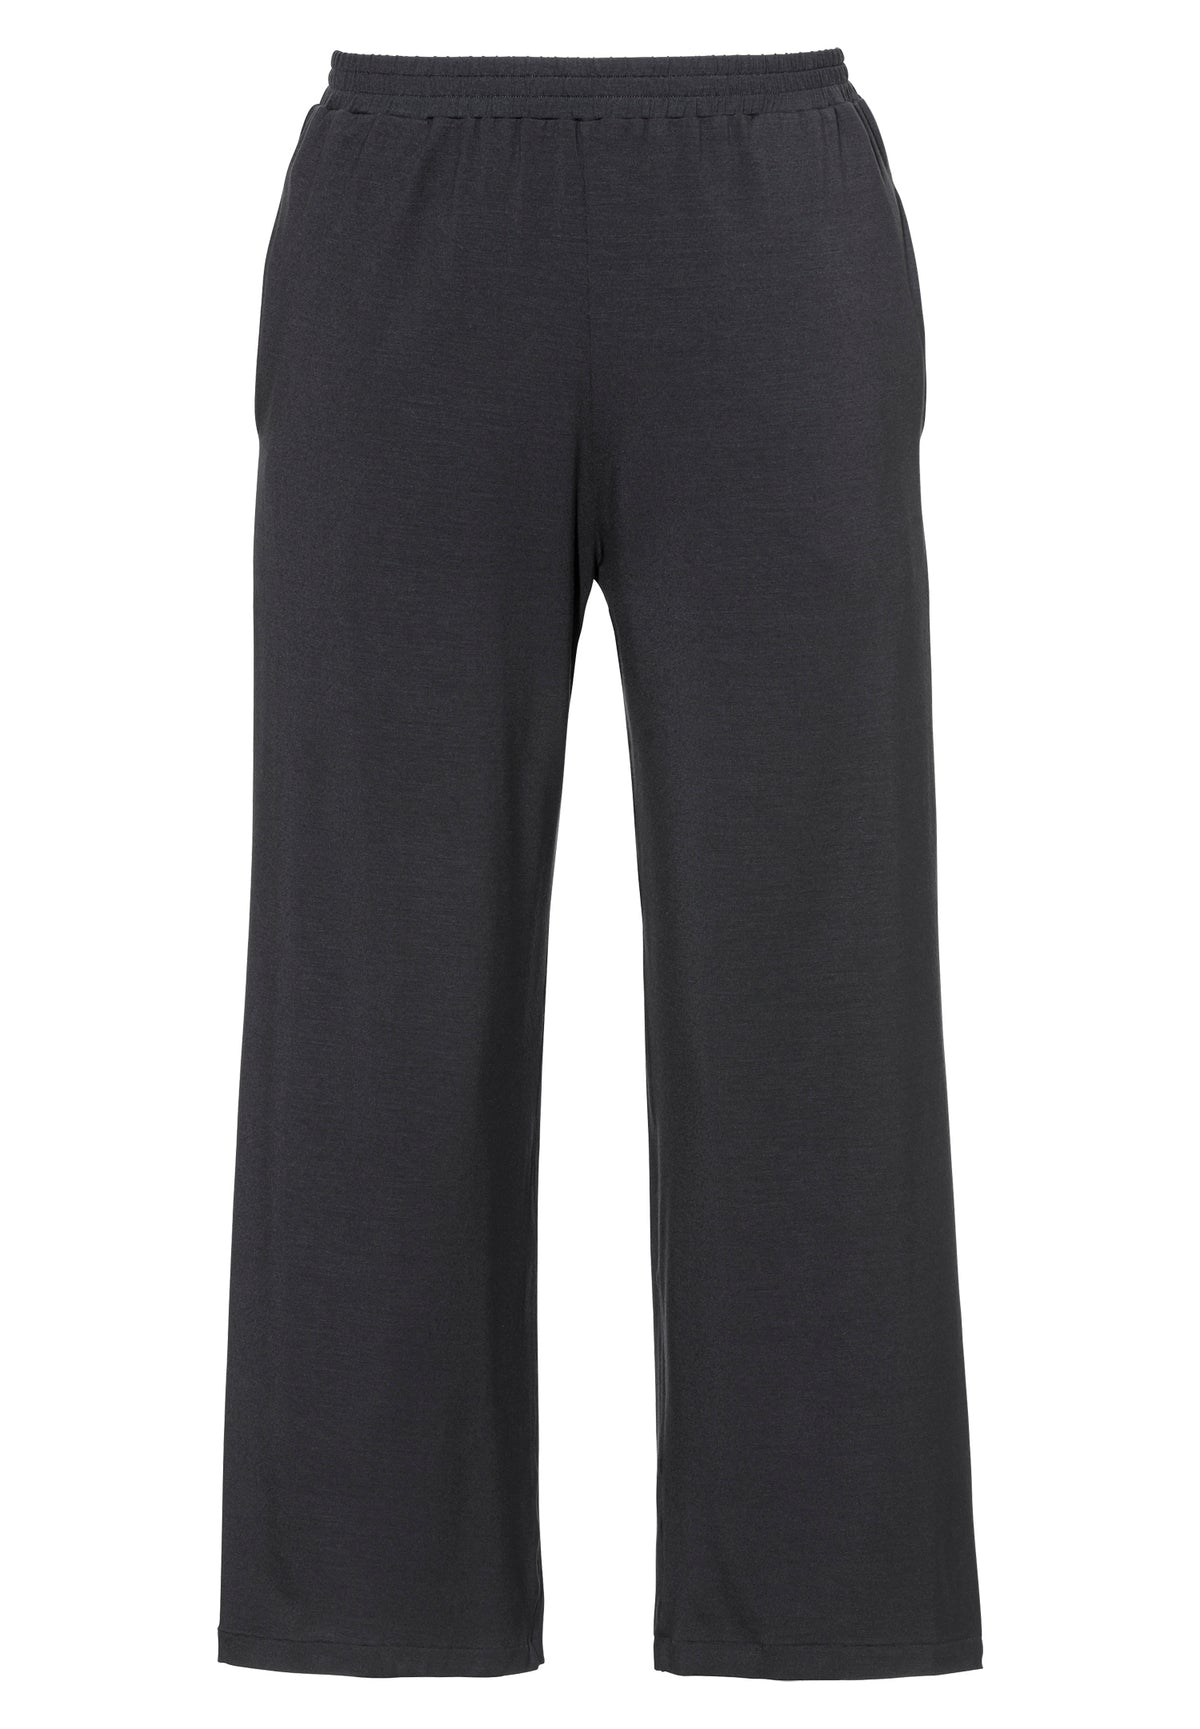 Pureness | Pants Cropped - nearly black